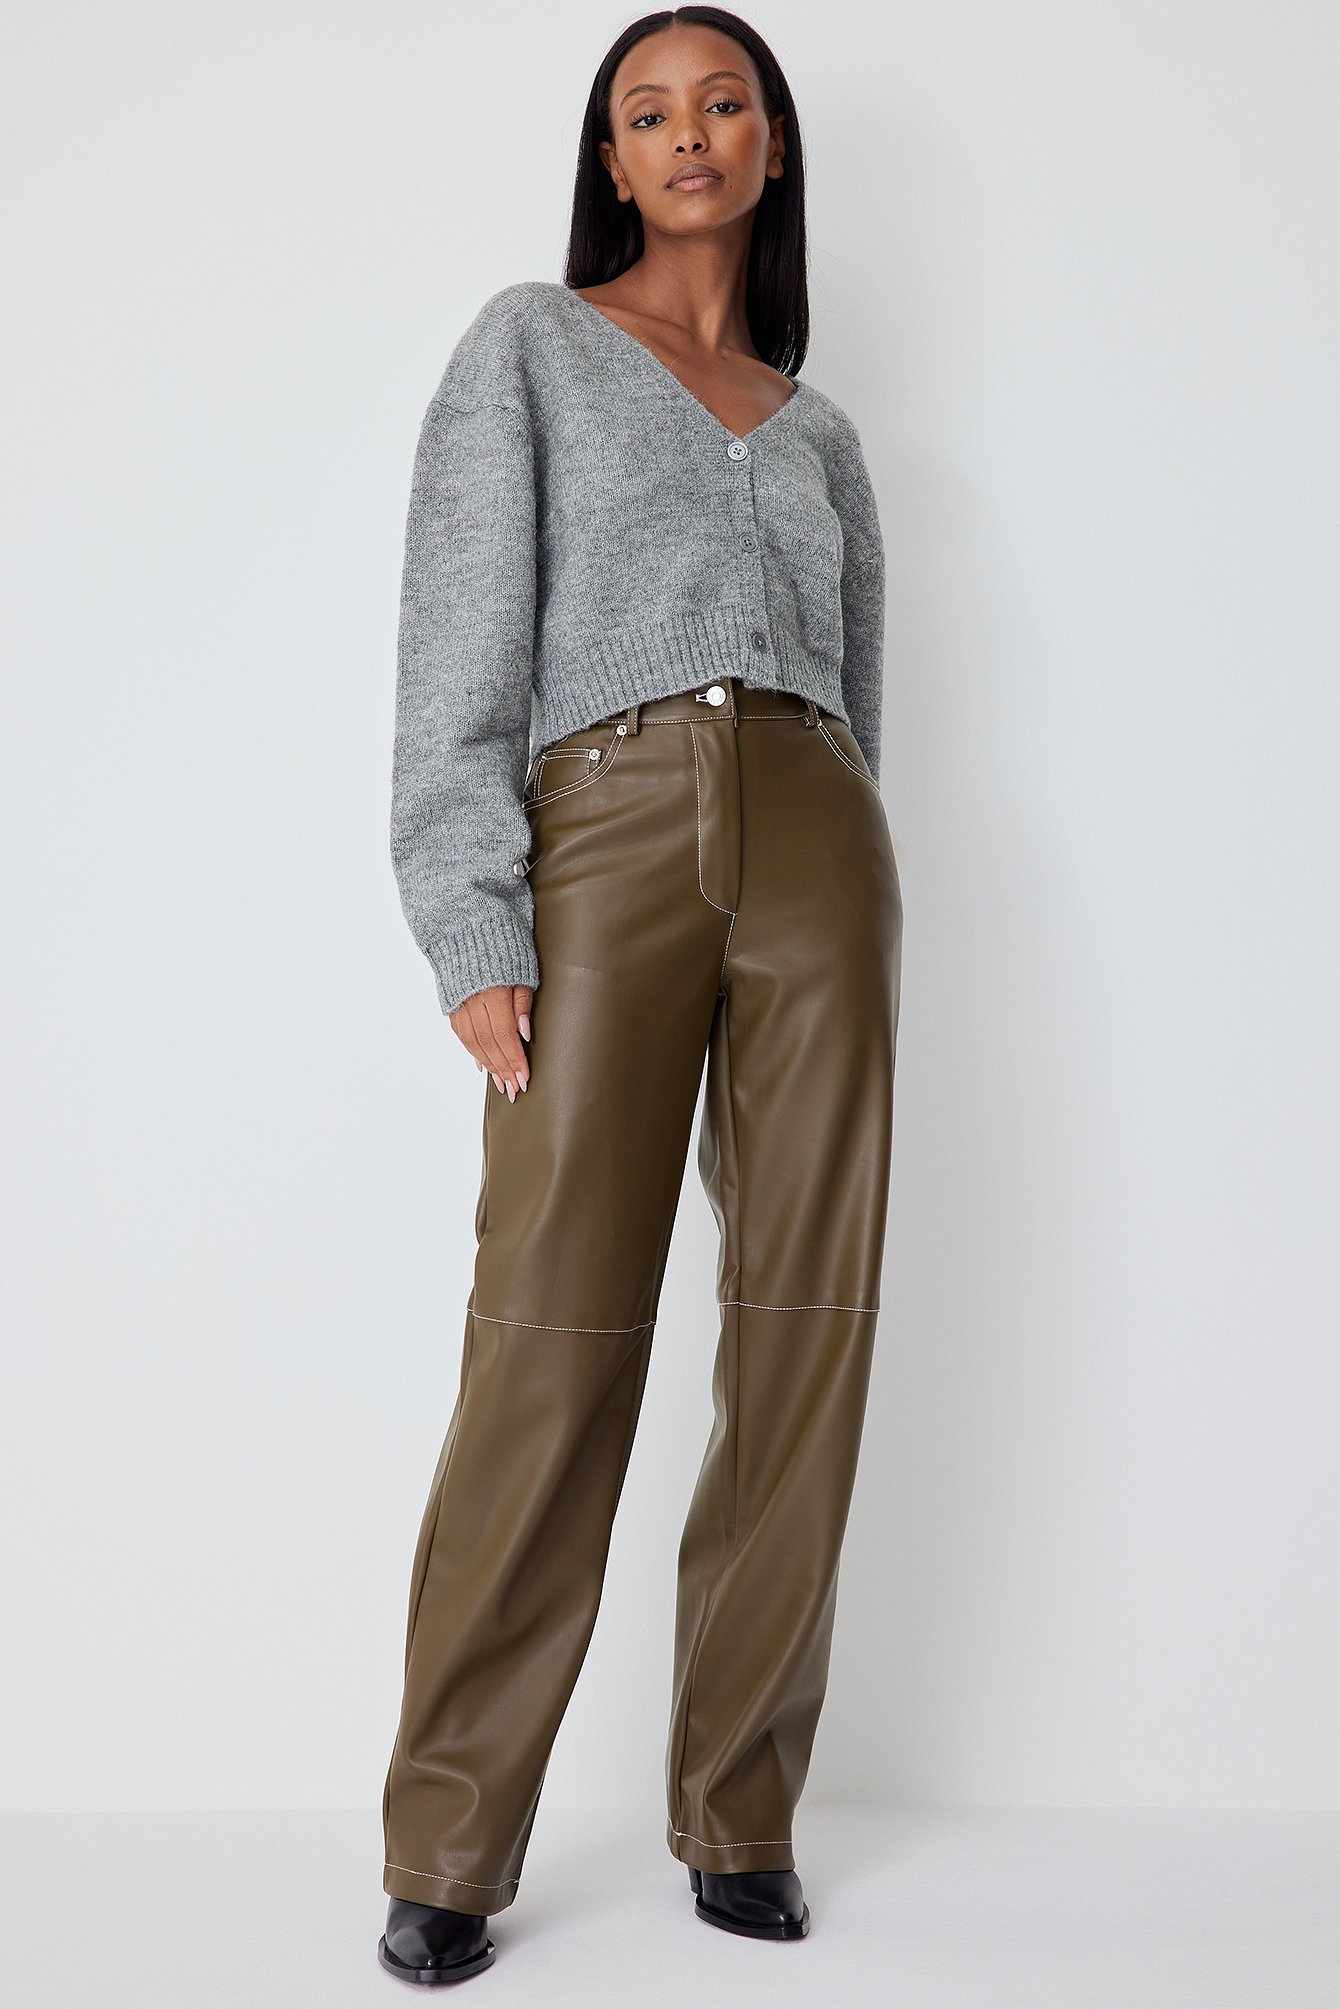 Joanni leather trousers - Buy Clothing online